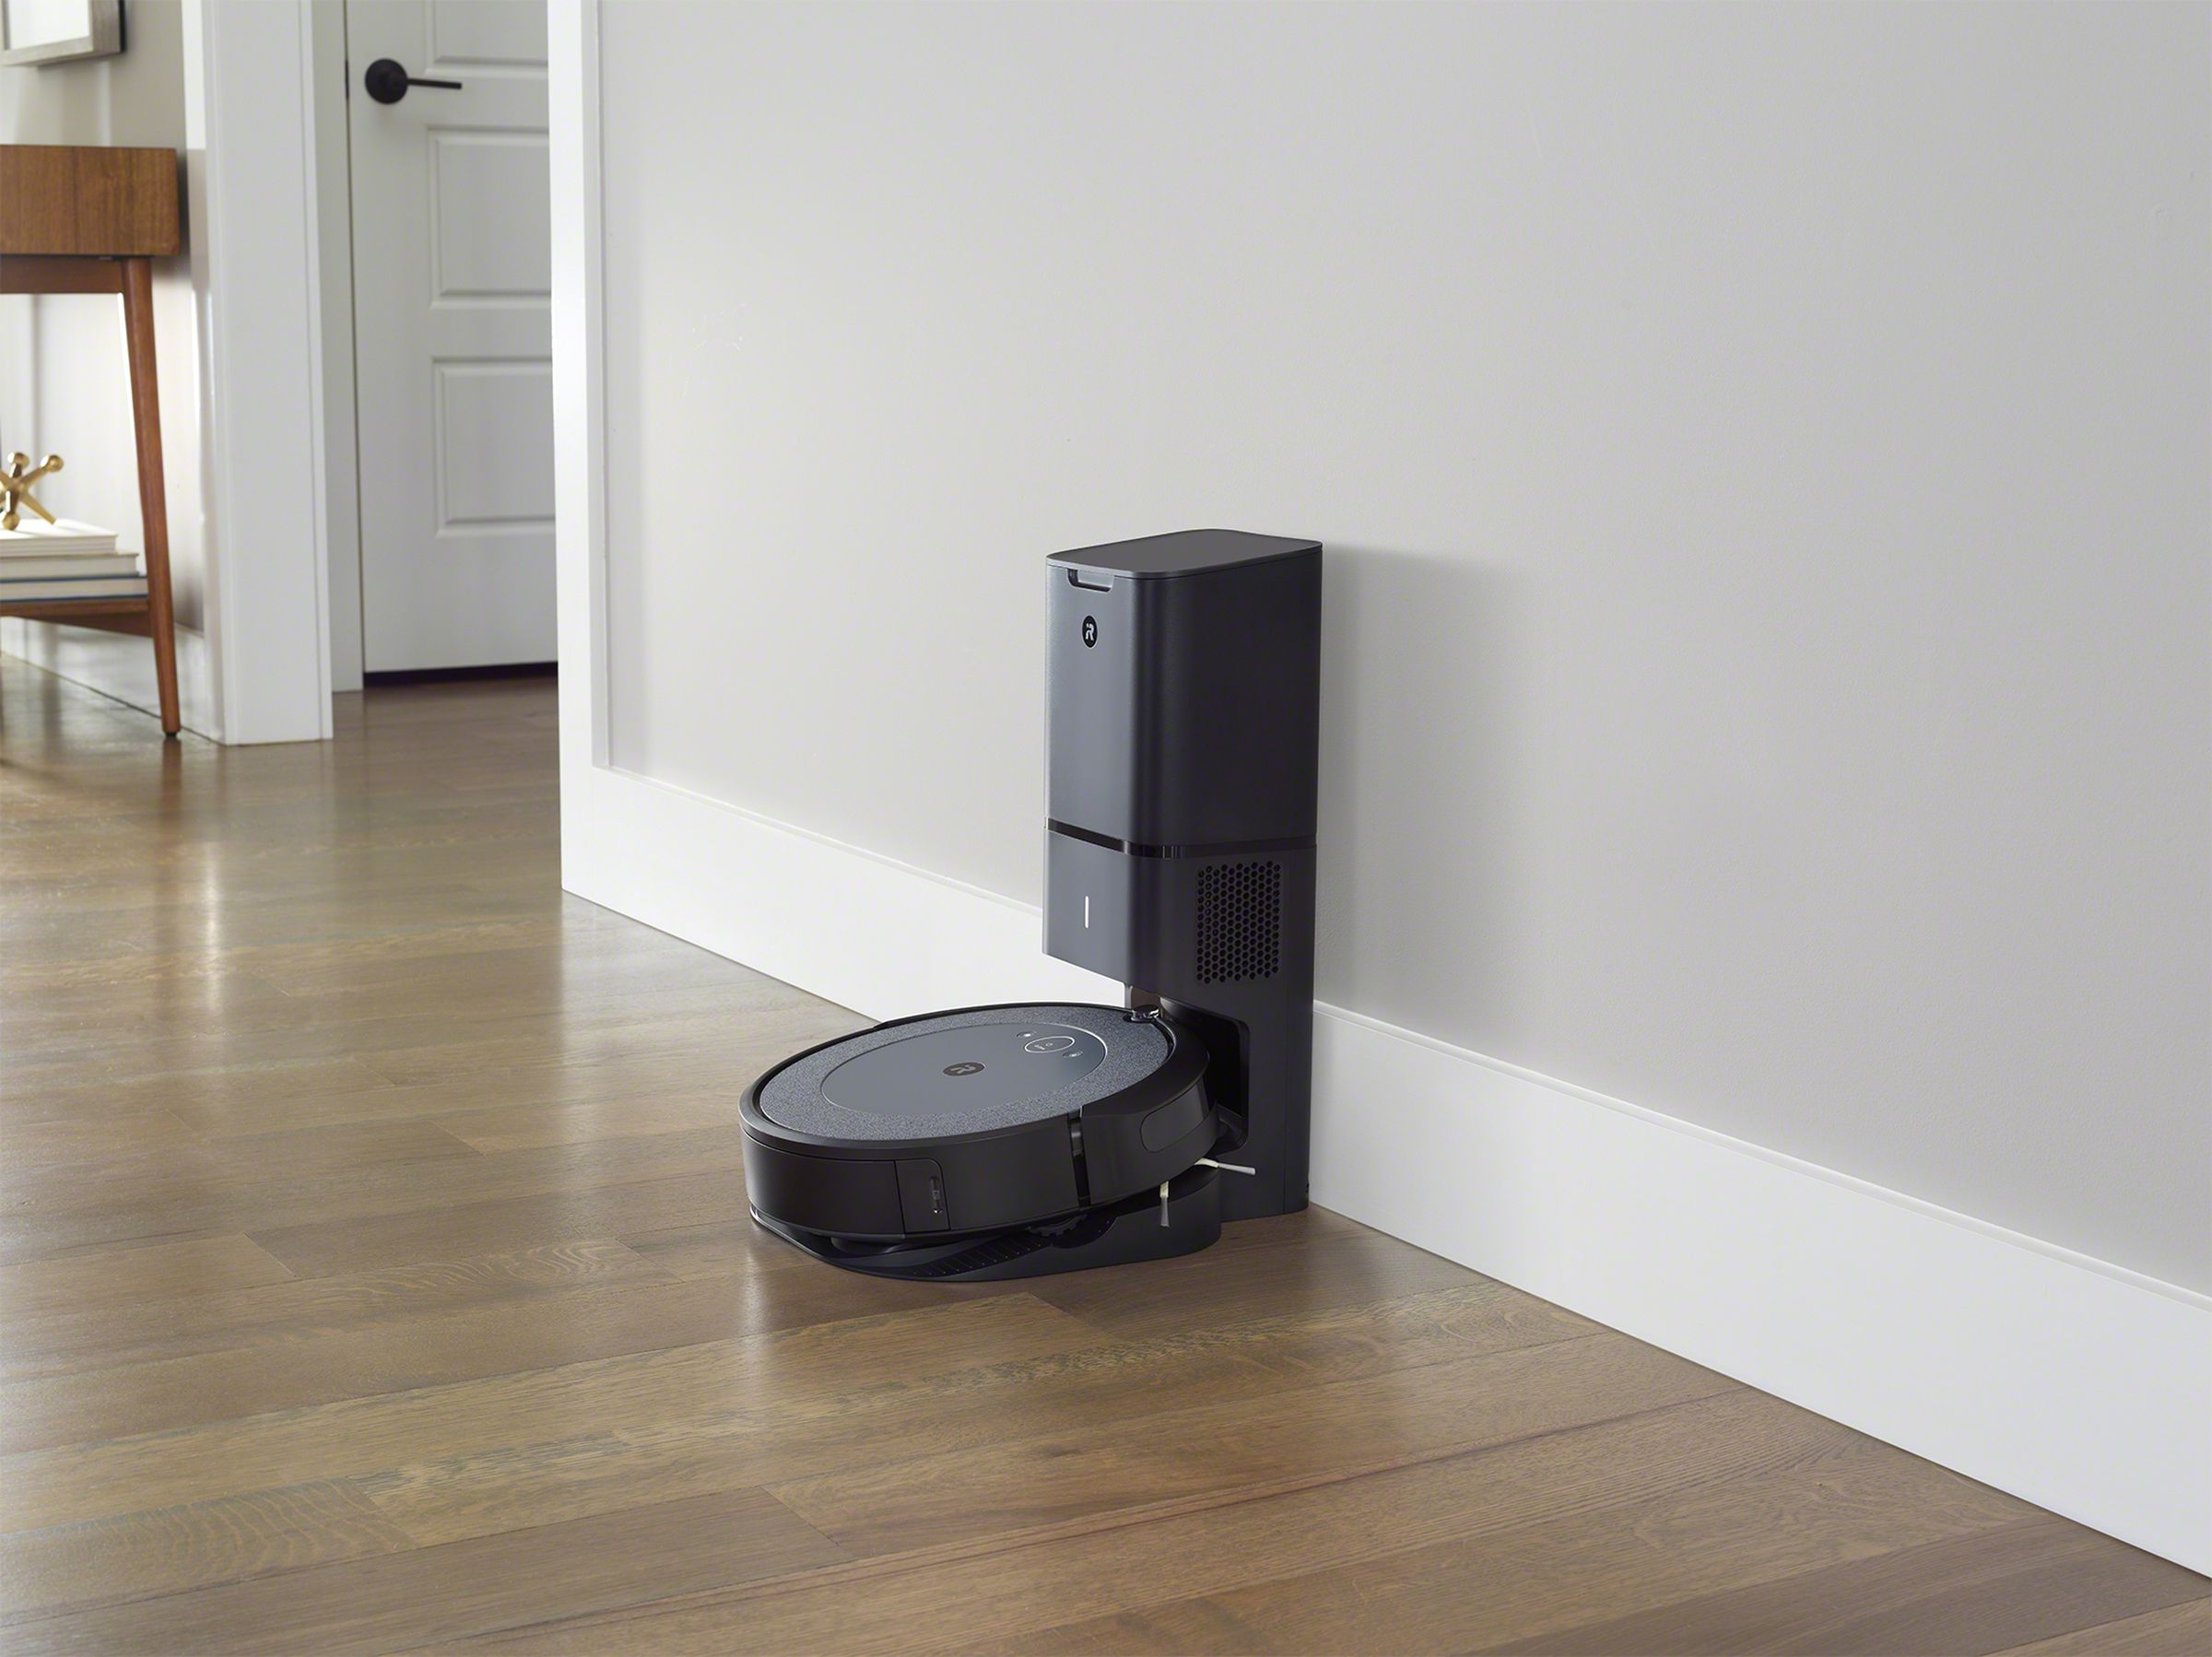 The Roomba i3 works with the Clean Base to empty the robot’s bin automatically.